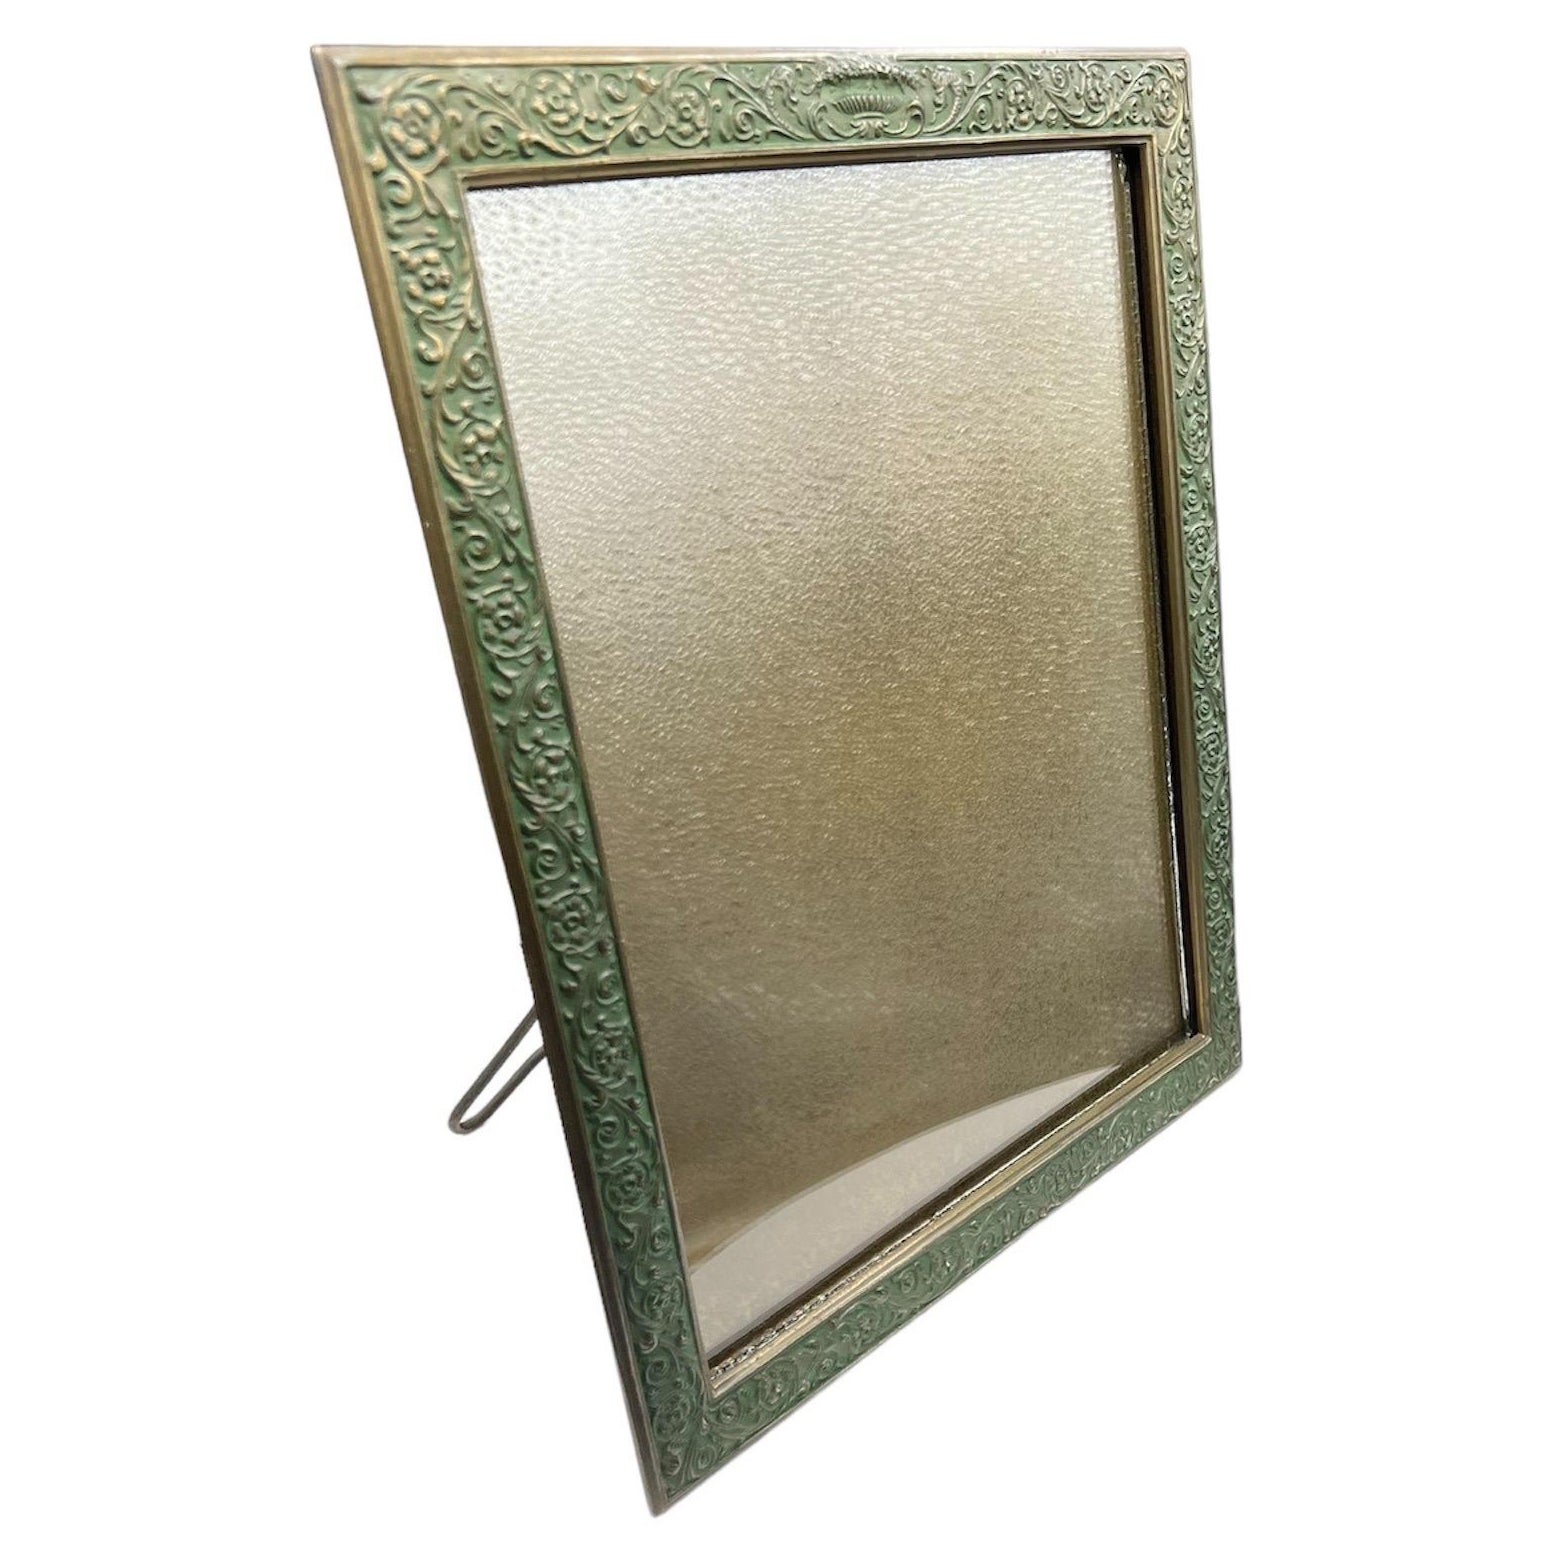 Tiffany Studios gilt-bronze picture frame, Stamped Tiffany Studios/NY/1611. For Sale